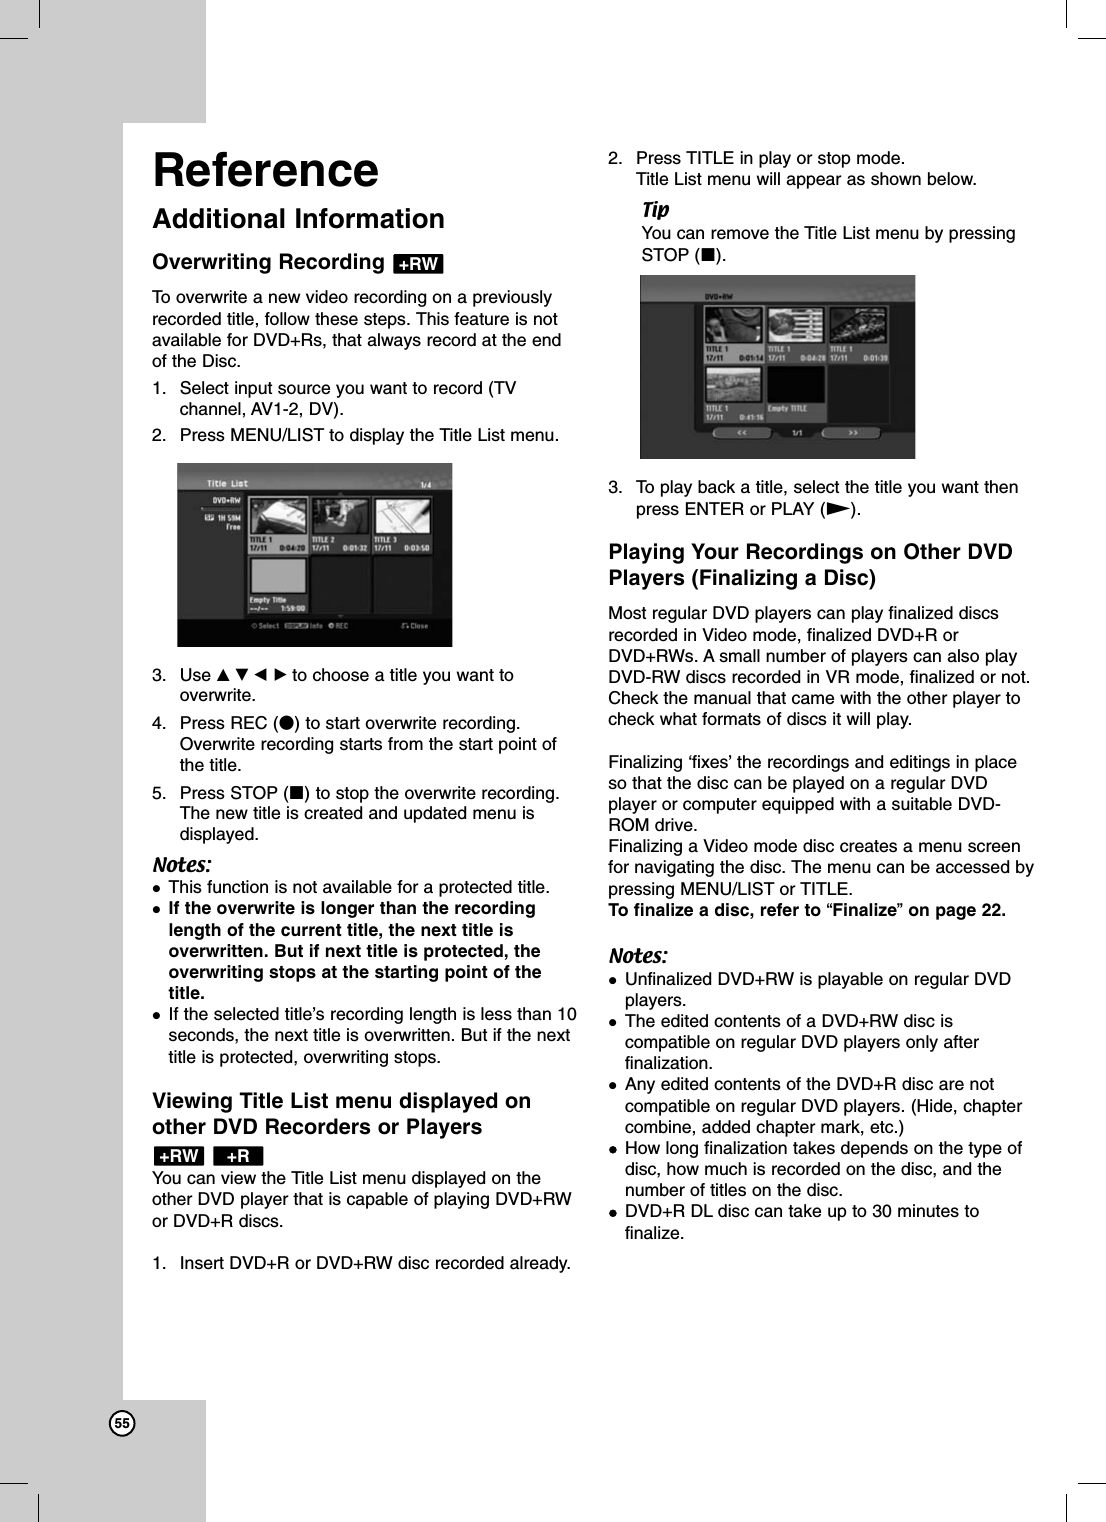 55ReferenceAdditional InformationOverwriting Recording To overwrite a new video recording on a previouslyrecorded title, follow these steps. This feature is notavailable for DVD+Rs, that always record at the endof the Disc.1. Select input source you want to record (TVchannel, AV1-2, DV). 2. Press MENU/LIST to display the Title List menu.3. Use vVbBto choose a title you want tooverwrite.4. Press REC (z) to start overwrite recording.Overwrite recording starts from the start point ofthe title.5. Press STOP (x) to stop the overwrite recording.The new title is created and updated menu isdisplayed.Notes:This function is not available for a protected title. If the overwrite is longer than the recordinglength of the current title, the next title isoverwritten. But if next title is protected, theoverwriting stops at the starting point of thetitle.If the selected title’s recording length is less than 10seconds, the next title is overwritten. But if the nexttitle is protected, overwriting stops.Viewing Title List menu displayed onother DVD Recorders or Players You can view the Title List menu displayed on theother DVD player that is capable of playing DVD+RWor DVD+R discs. 1. Insert DVD+R or DVD+RW disc recorded already.2. Press TITLE in play or stop mode.Title List menu will appear as shown below.TipYou can remove the Title List menu by pressingSTOP (x).3. To play back a title, select the title you want thenpress ENTER or PLAY (N).Playing Your Recordings on Other DVDPlayers (Finalizing a Disc)Most regular DVD players can play finalized discsrecorded in Video mode, finalized DVD+R orDVD+RWs. A small number of players can also playDVD-RW discs recorded in VR mode, finalized or not.Check the manual that came with the other player tocheck what formats of discs it will play.Finalizing ‘fixes’ the recordings and editings in placeso that the disc can be played on a regular DVDplayer or computer equipped with a suitable DVD-ROM drive.Finalizing a Video mode disc creates a menu screenfor navigating the disc. The menu can be accessed bypressing MENU/LIST or TITLE. To finalize a disc, refer to “Finalize”on page 22.Notes:Unfinalized DVD+RW is playable on regular DVDplayers.The edited contents of a DVD+RW disc iscompatible on regular DVD players only afterfinalization.Any edited contents of the DVD+R disc are not compatible on regular DVD players. (Hide, chaptercombine, added chapter mark, etc.)How long finalization takes depends on the type ofdisc, how much is recorded on the disc, and thenumber of titles on the disc. DVD+R DL disc can take up to 30 minutes tofinalize.+R+RW+RW